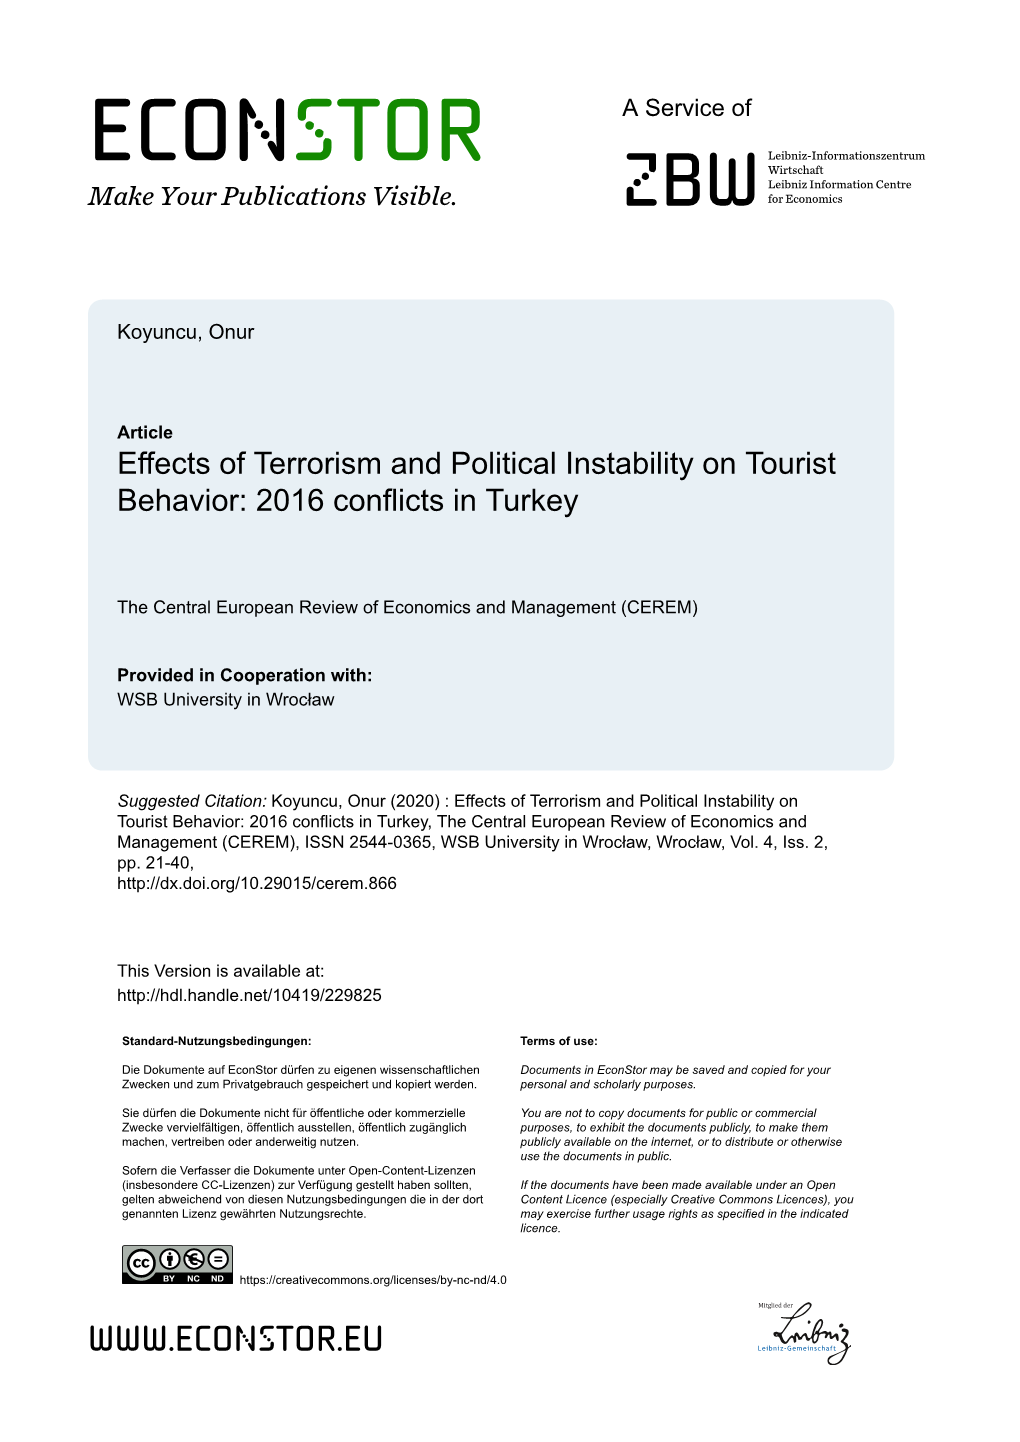 Effects of Terrorism and Political Instability on Tourist Behavior: 2016 Conflicts in Turkey